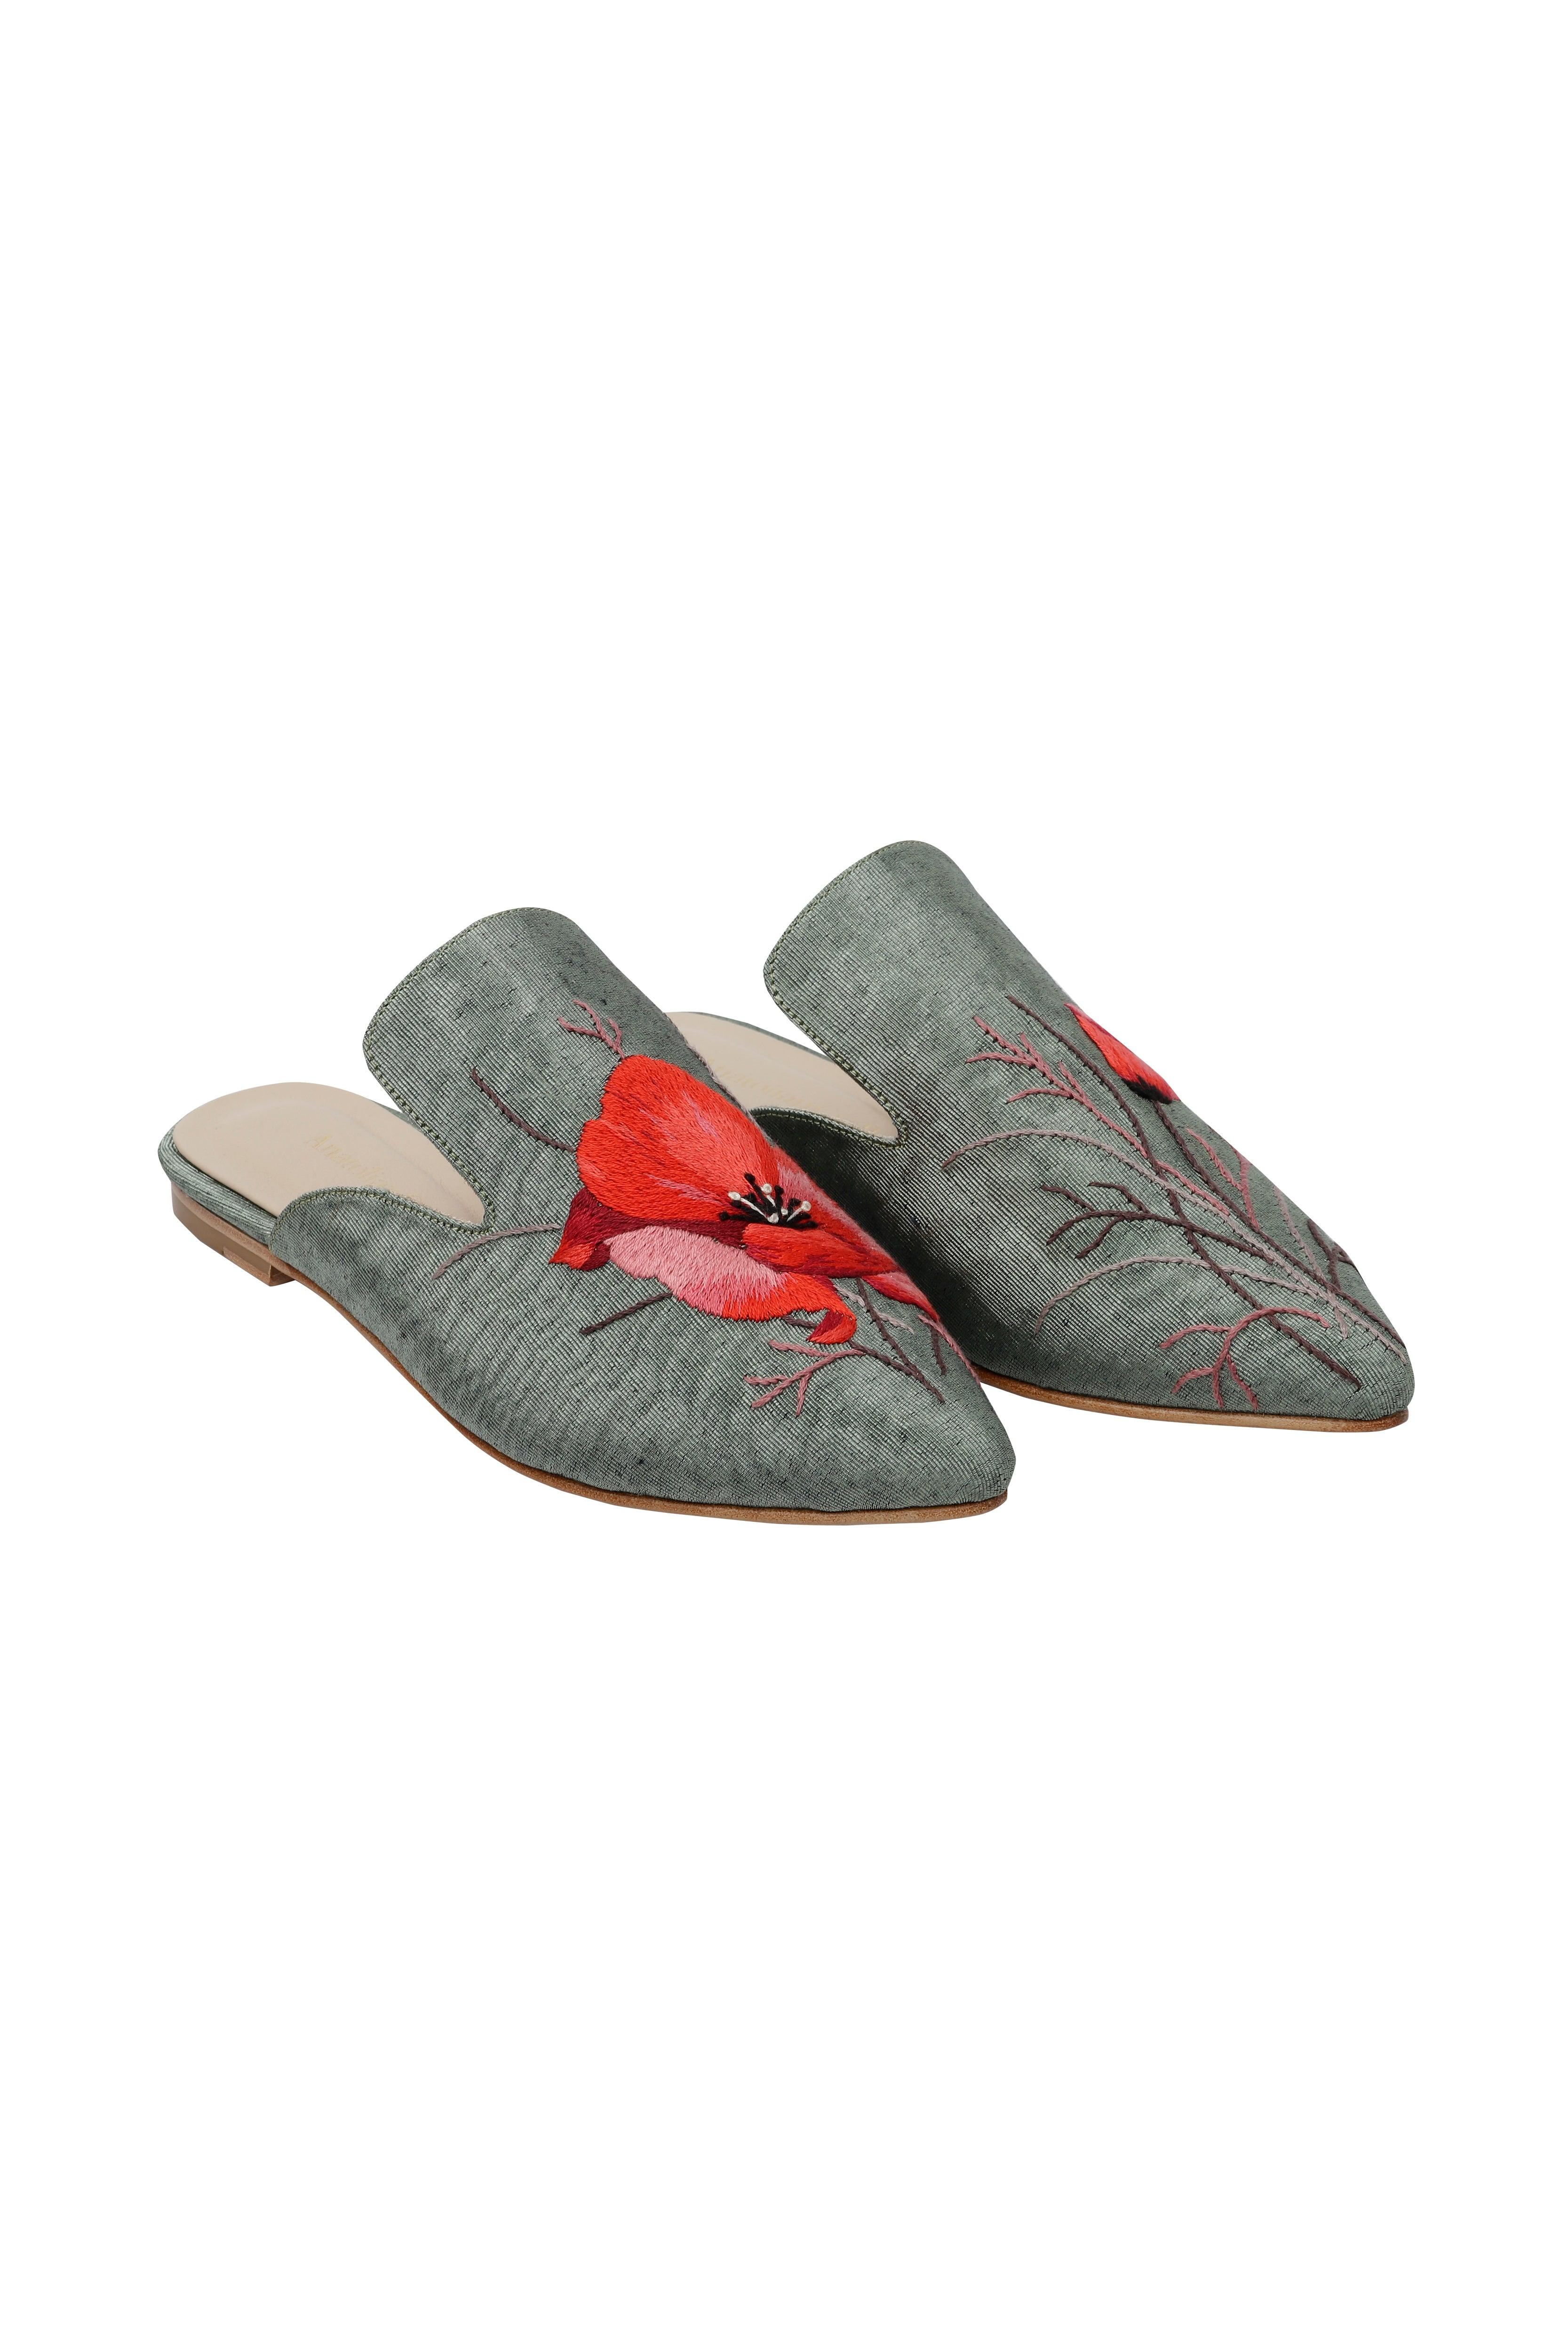 Whispering Poppies - Hand-Embroidered Limited Edition Mules - AnatolianCraft